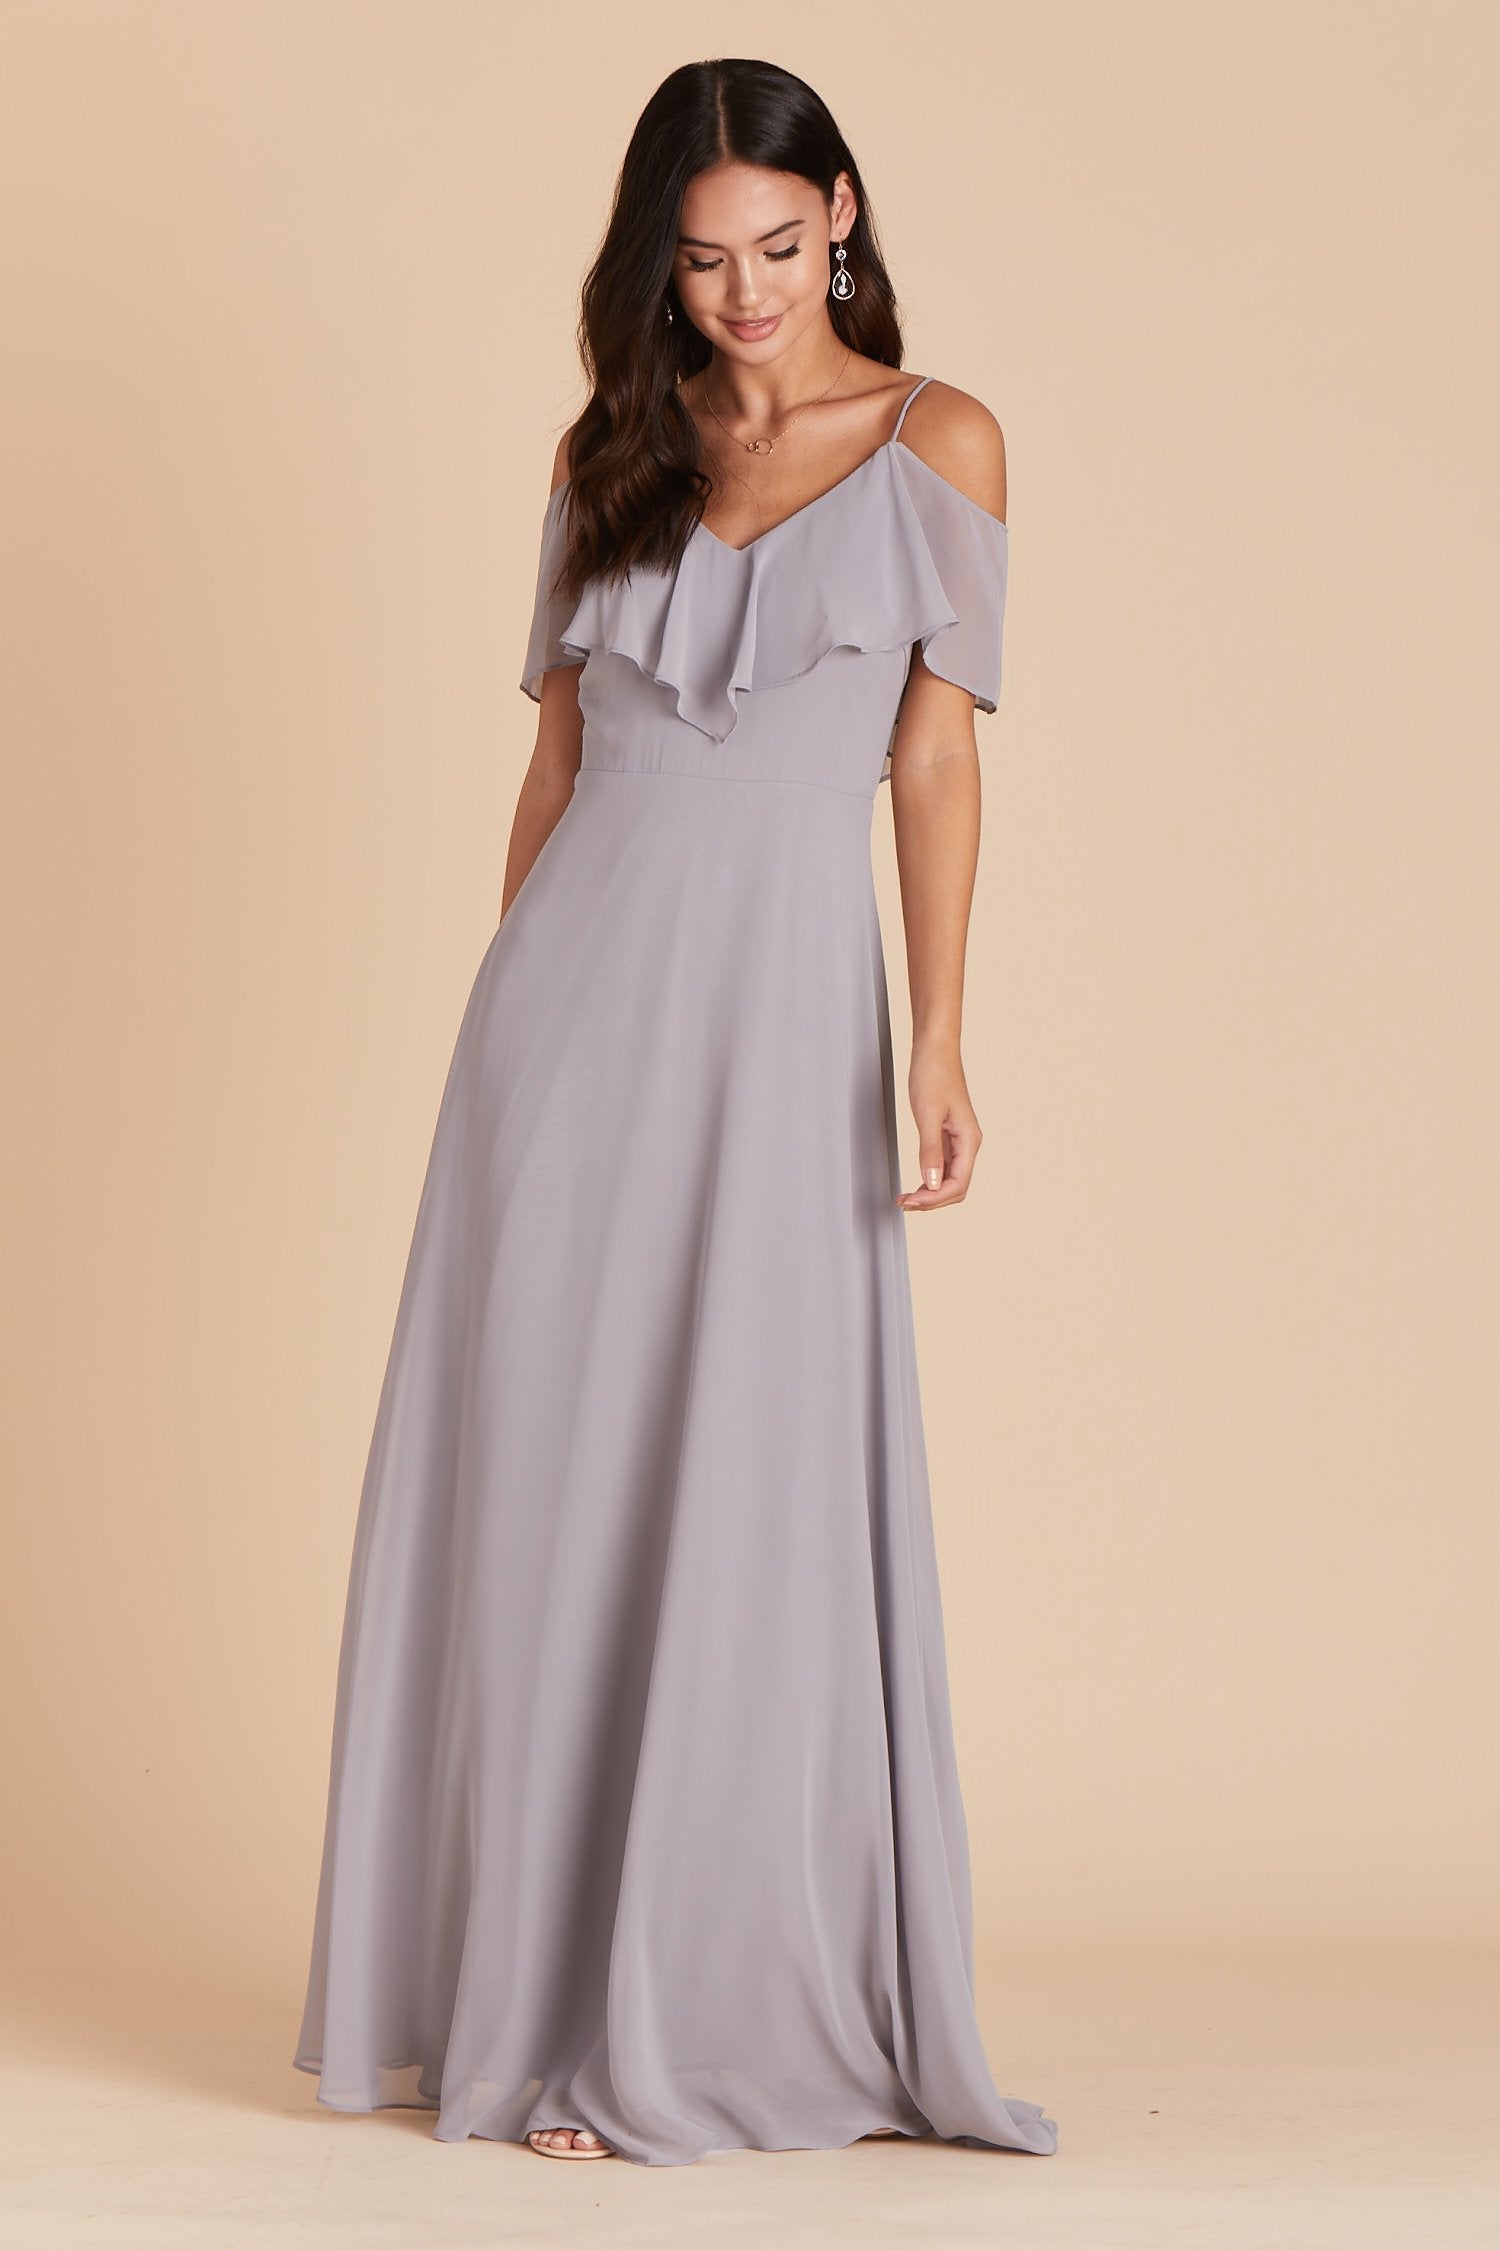 Jane convertible bridesmaid dress in silver chiffon by Birdy Grey, front view